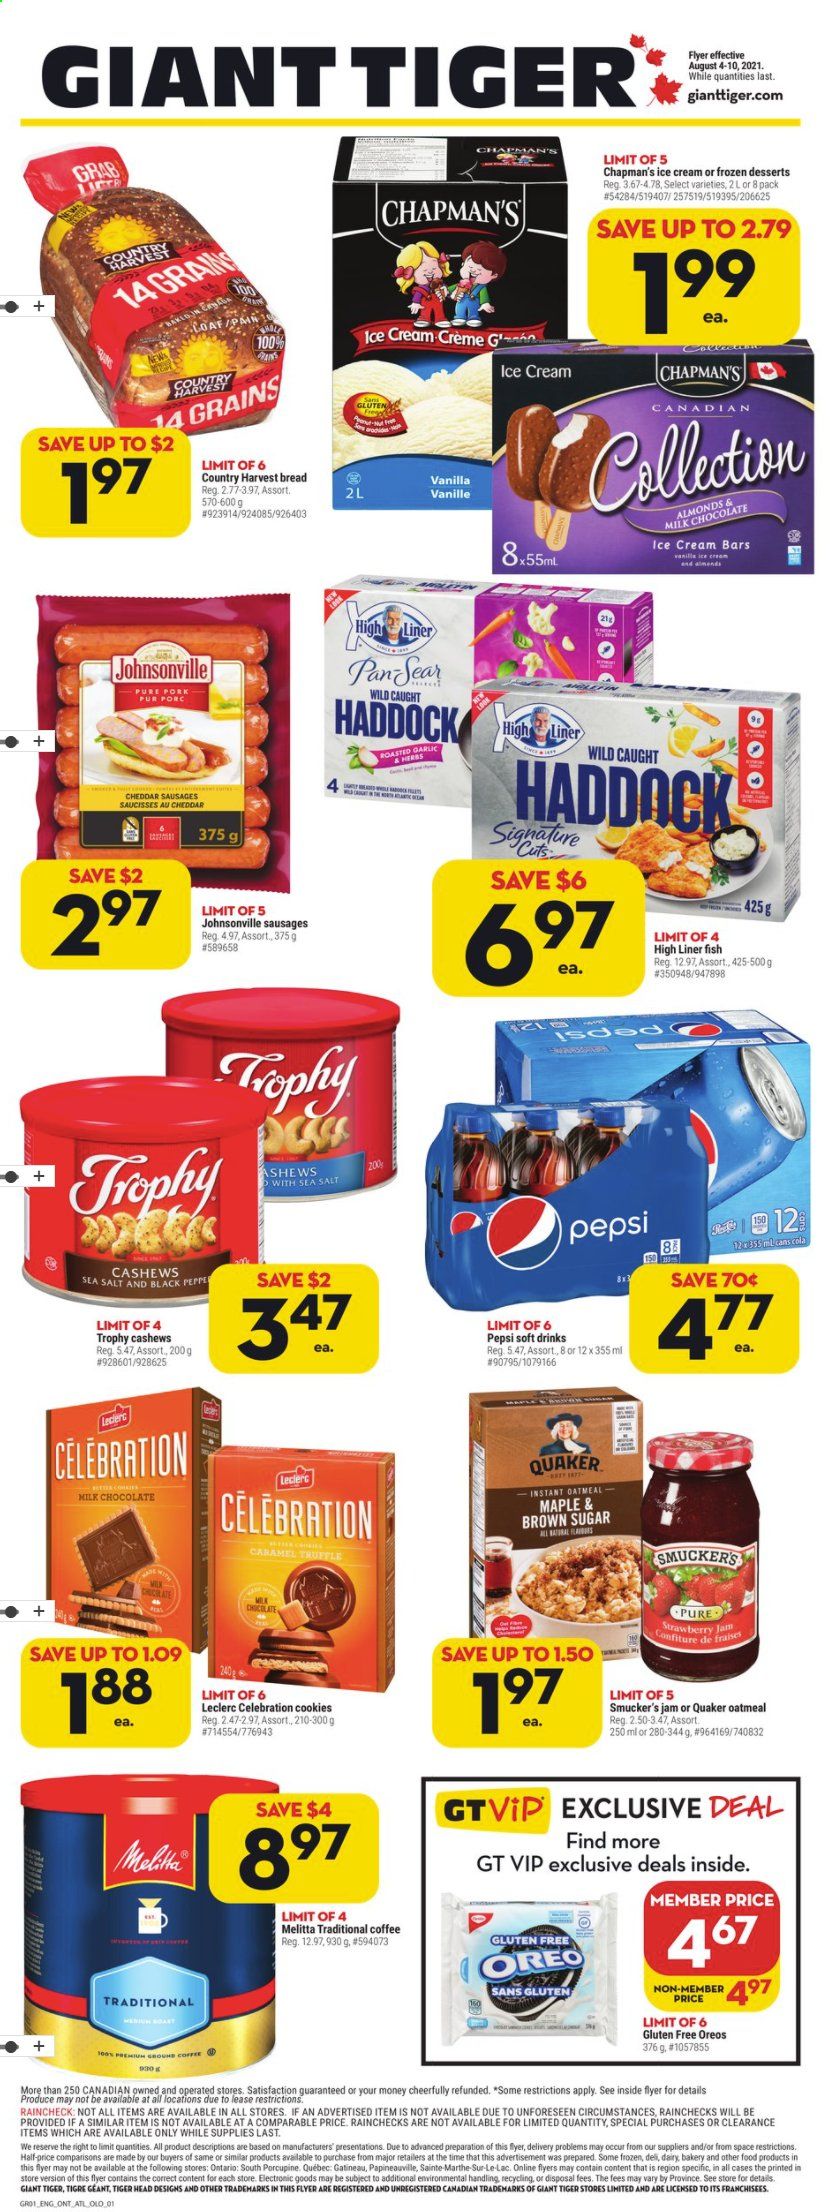 thumbnail - Giant Tiger Flyer - August 04, 2021 - August 10, 2021 - Sales products - bread, haddock, fish, Quaker, Johnsonville, sausage, cheddar, cheese, Oreo, ice cream, ice cream bars, Country Harvest, cookies, milk chocolate, truffles, Celebration, oatmeal, fruit jam, almonds, cashews, Pepsi, soft drink, coffee, pan, trophy cup. Page 1.